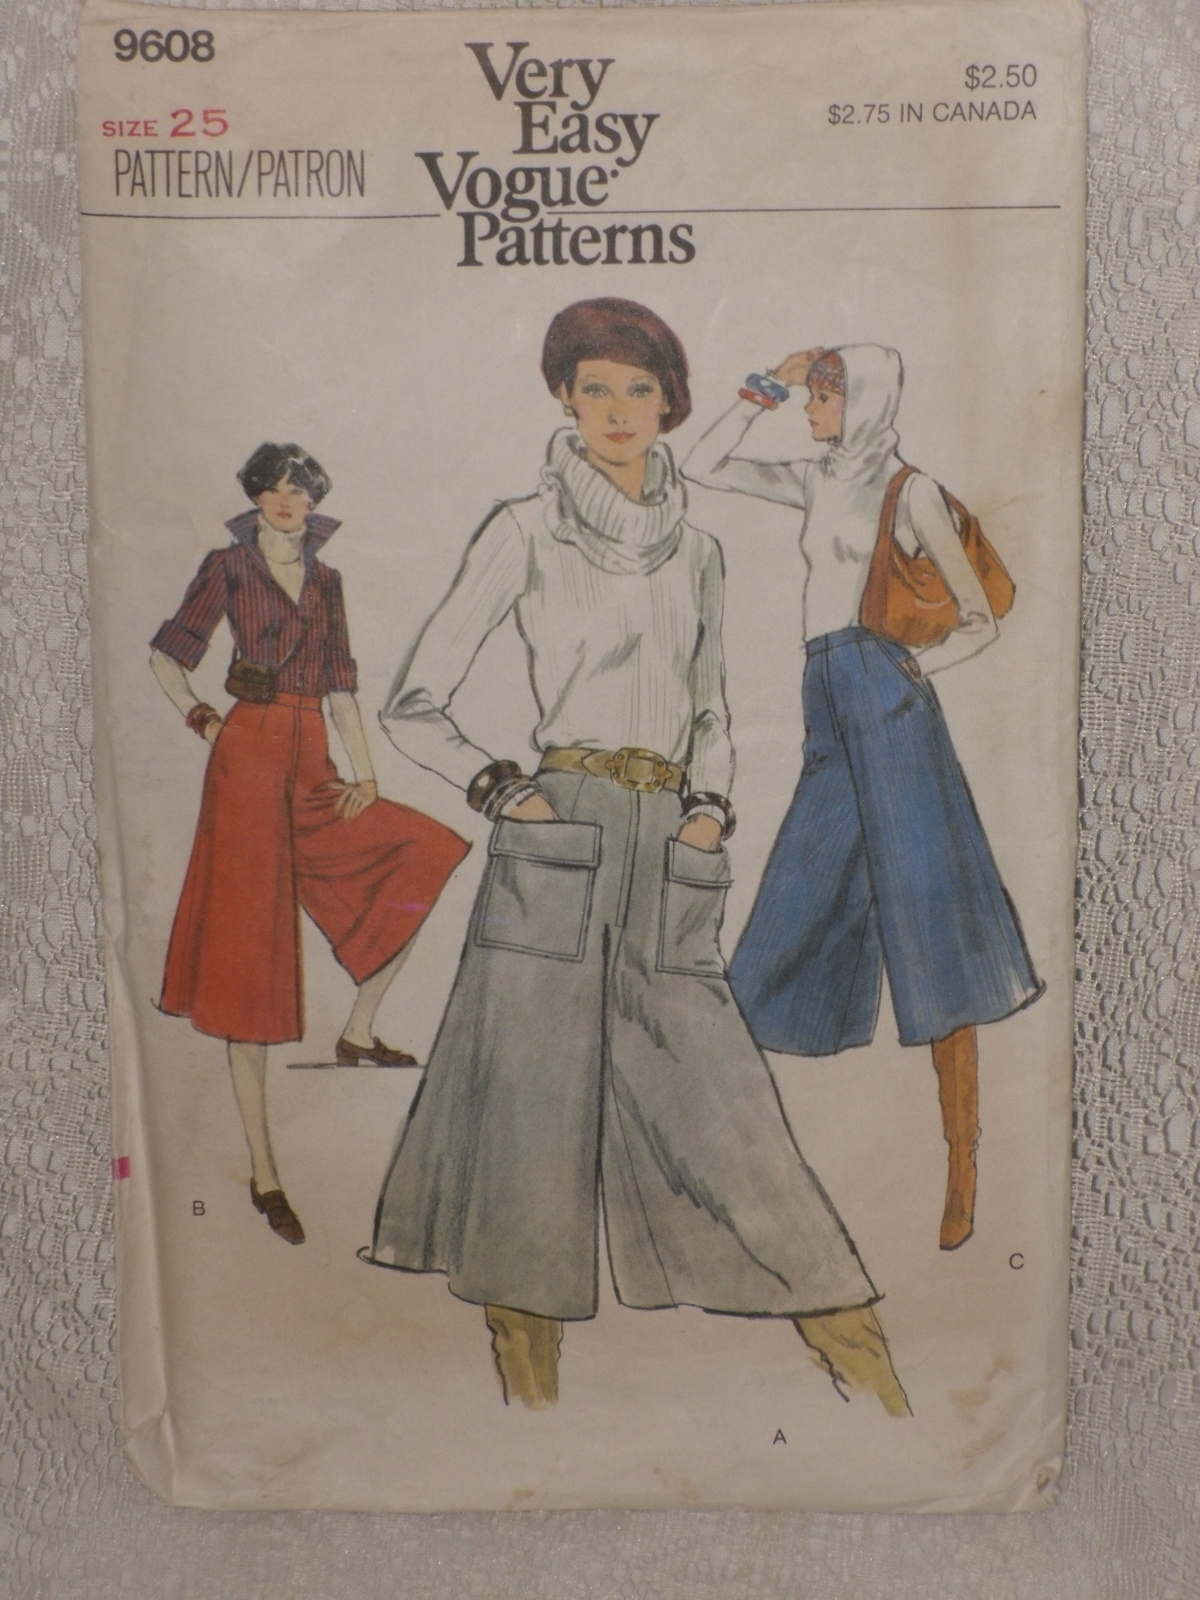 Very Easy Vogue Pattern 9608 Misses' Culottes Waist 25" Vintage 1970's - $7.50